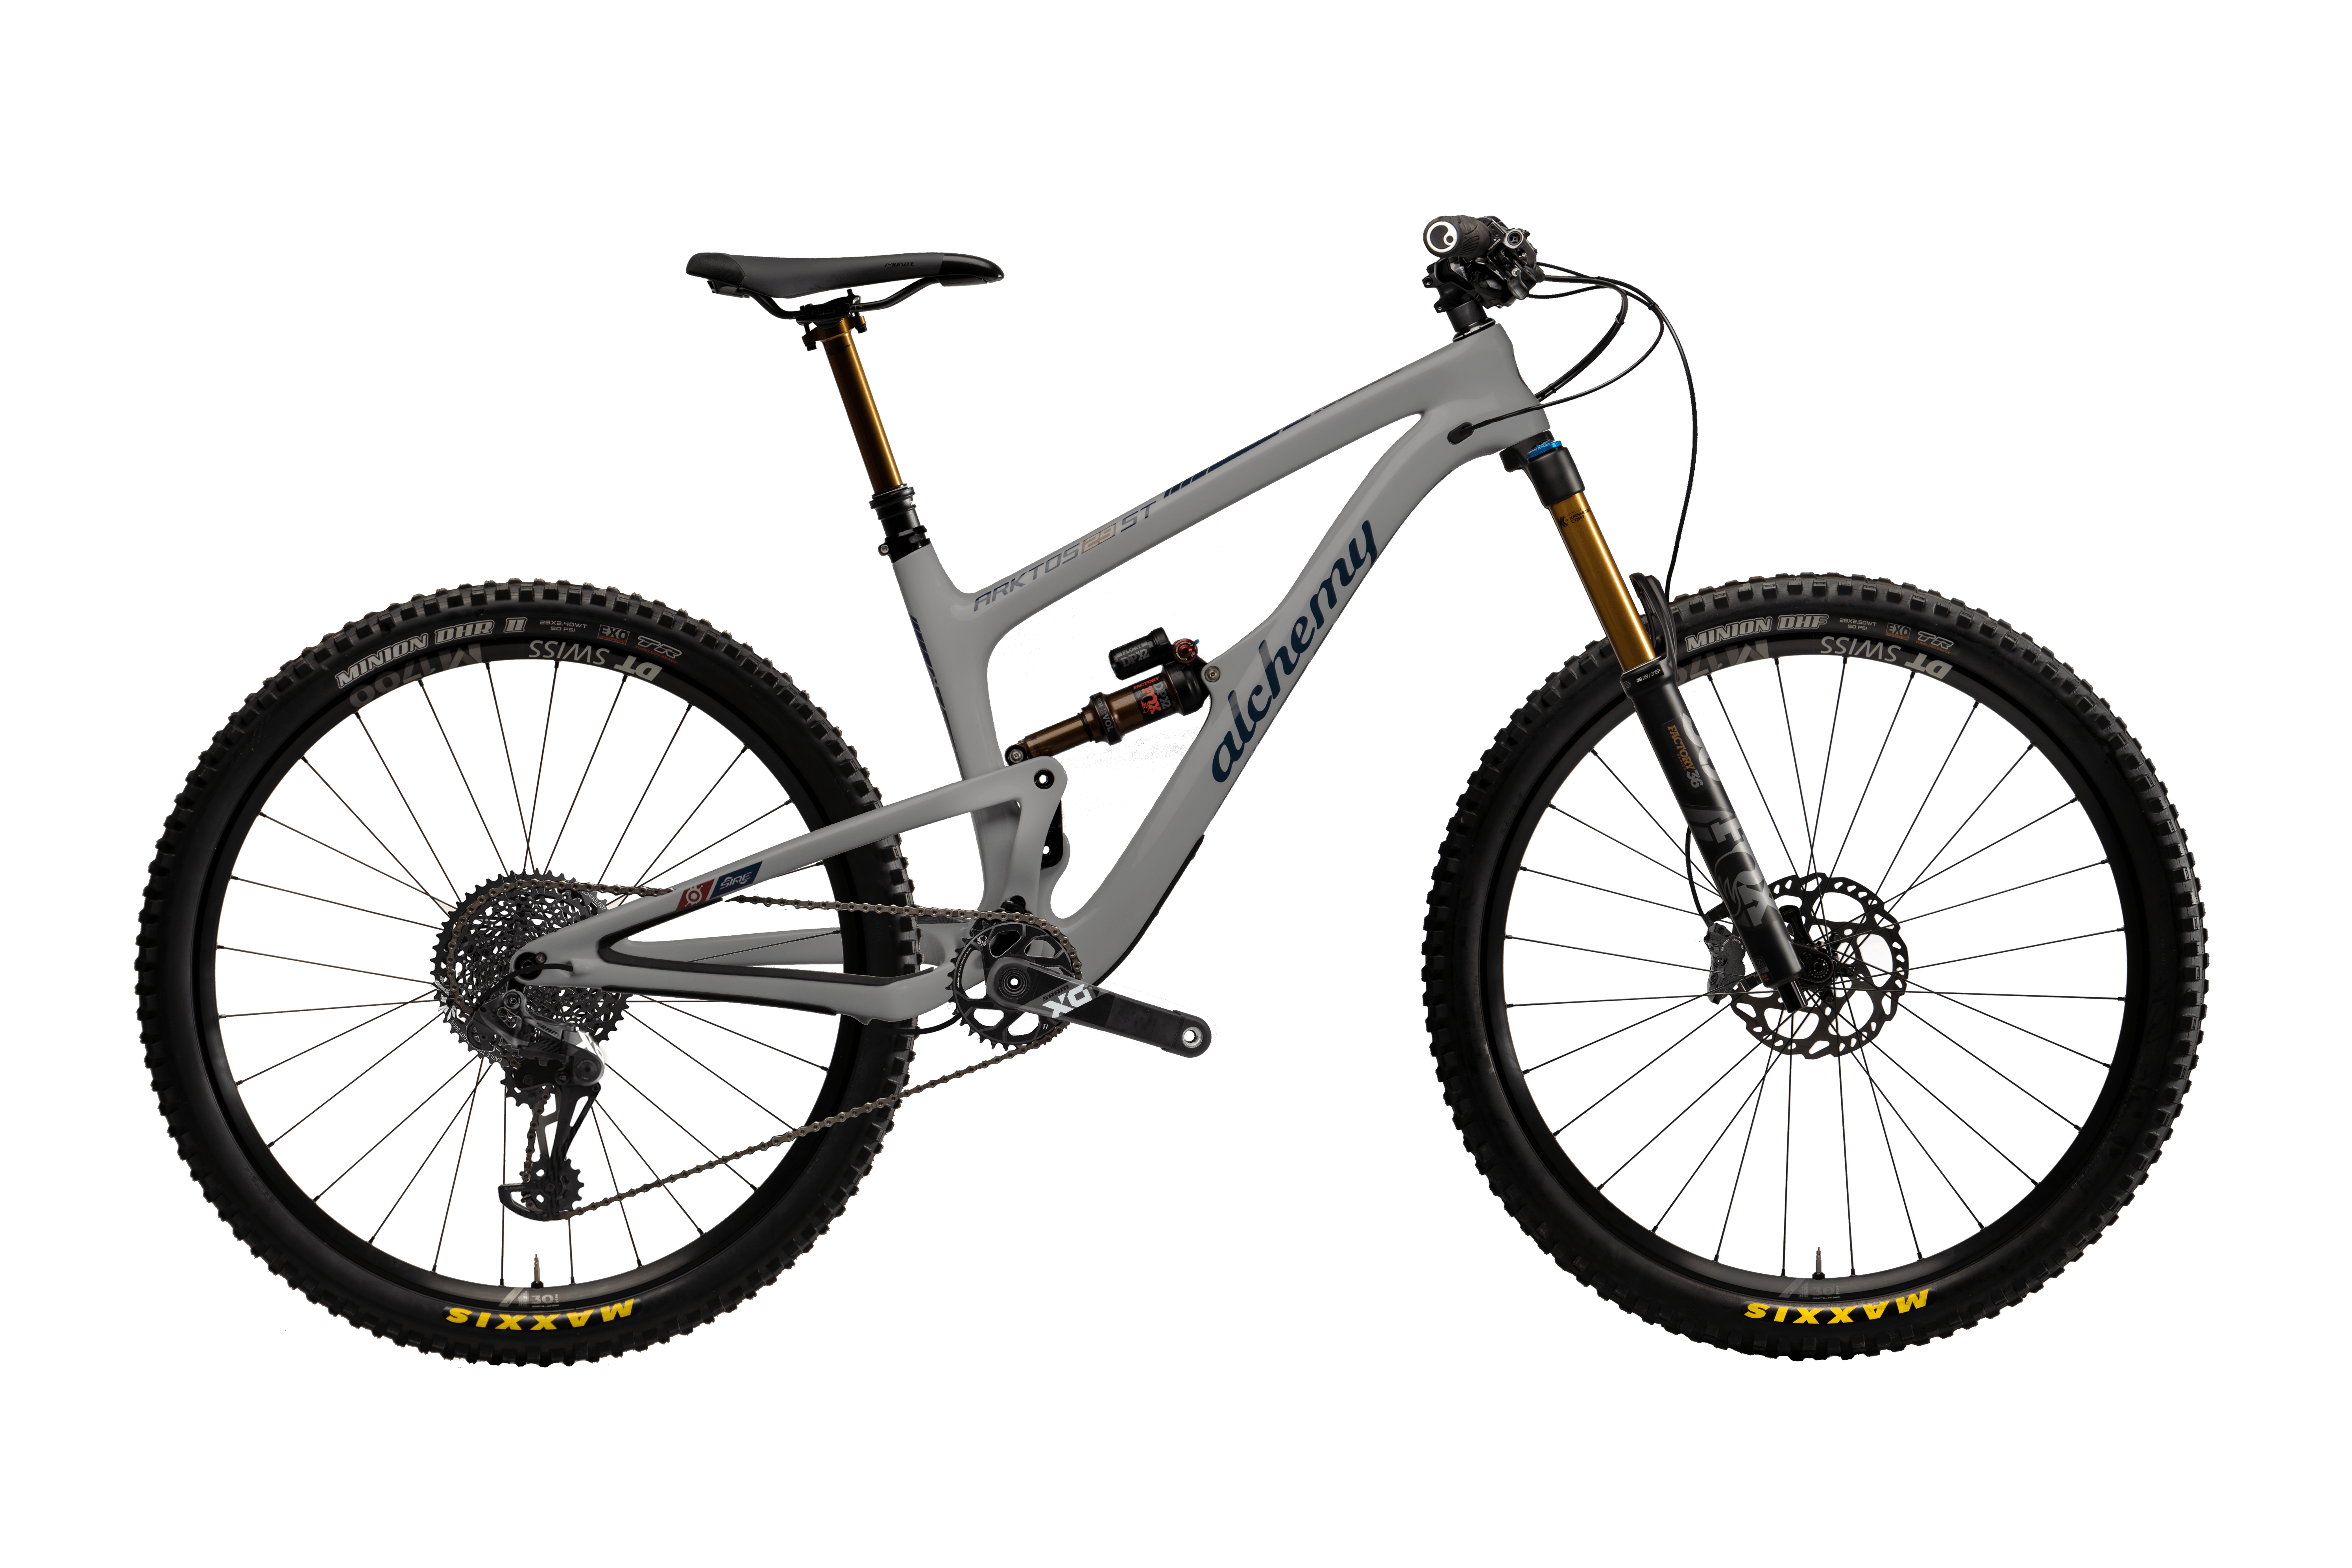 Alchemy Bicycles' Arktos 29 ST mountain bike against a white background.